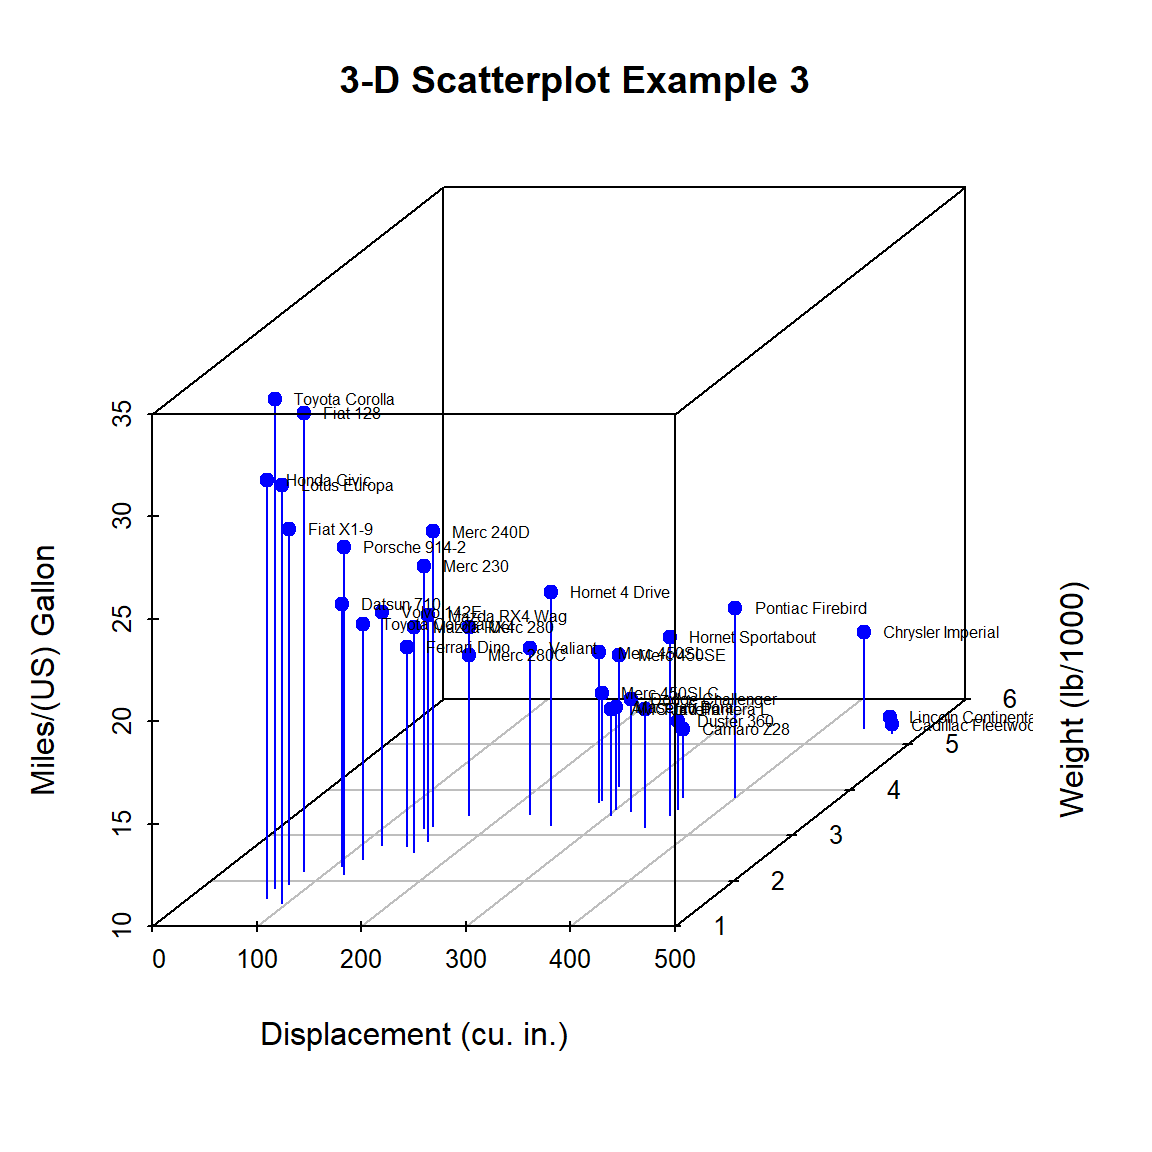 3-D scatterplot with vertical lines and point labels